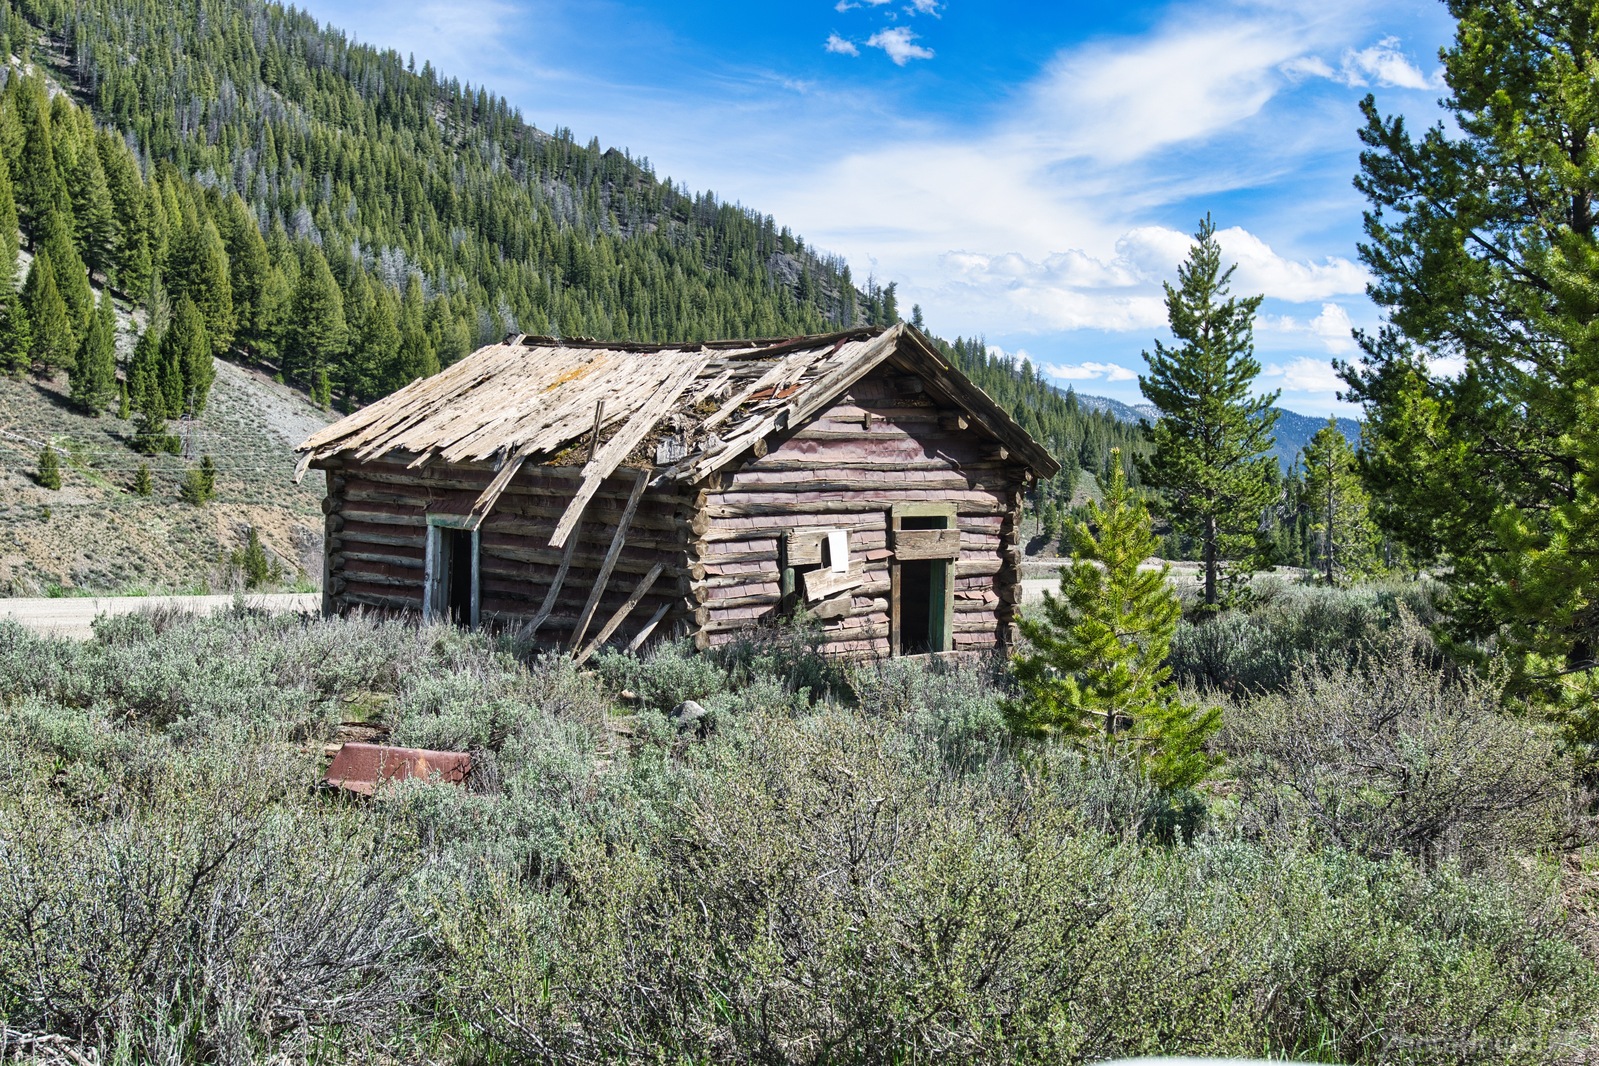 Image of Bonanza Ghost Town by Steve West